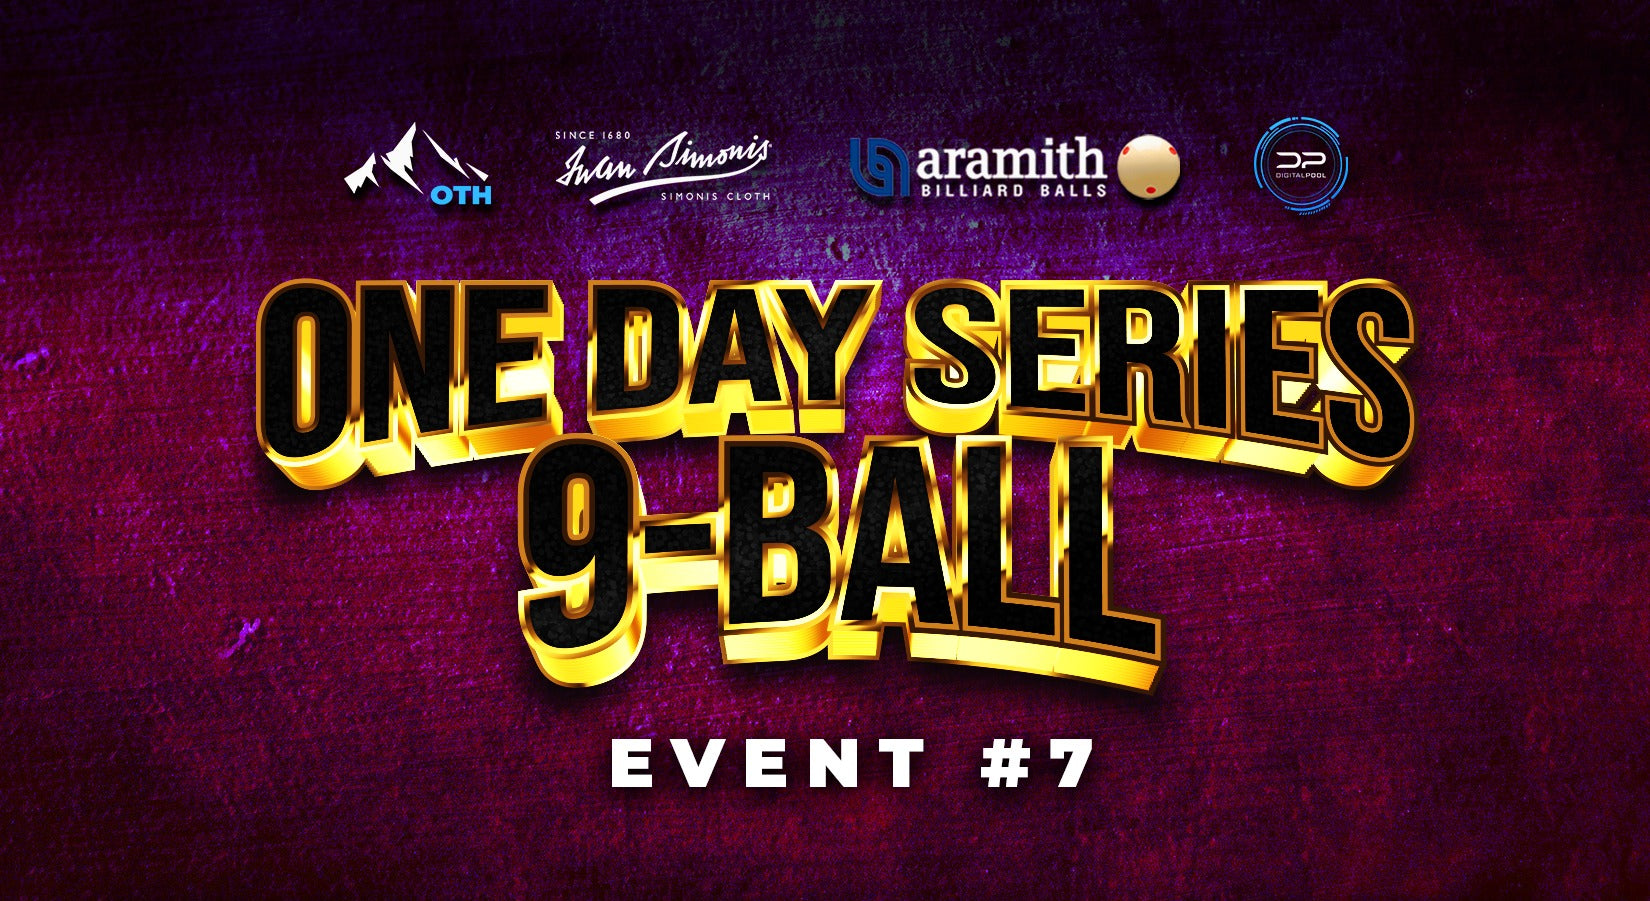 Sep 14 - One Day Open 9-Ball Series Event #7